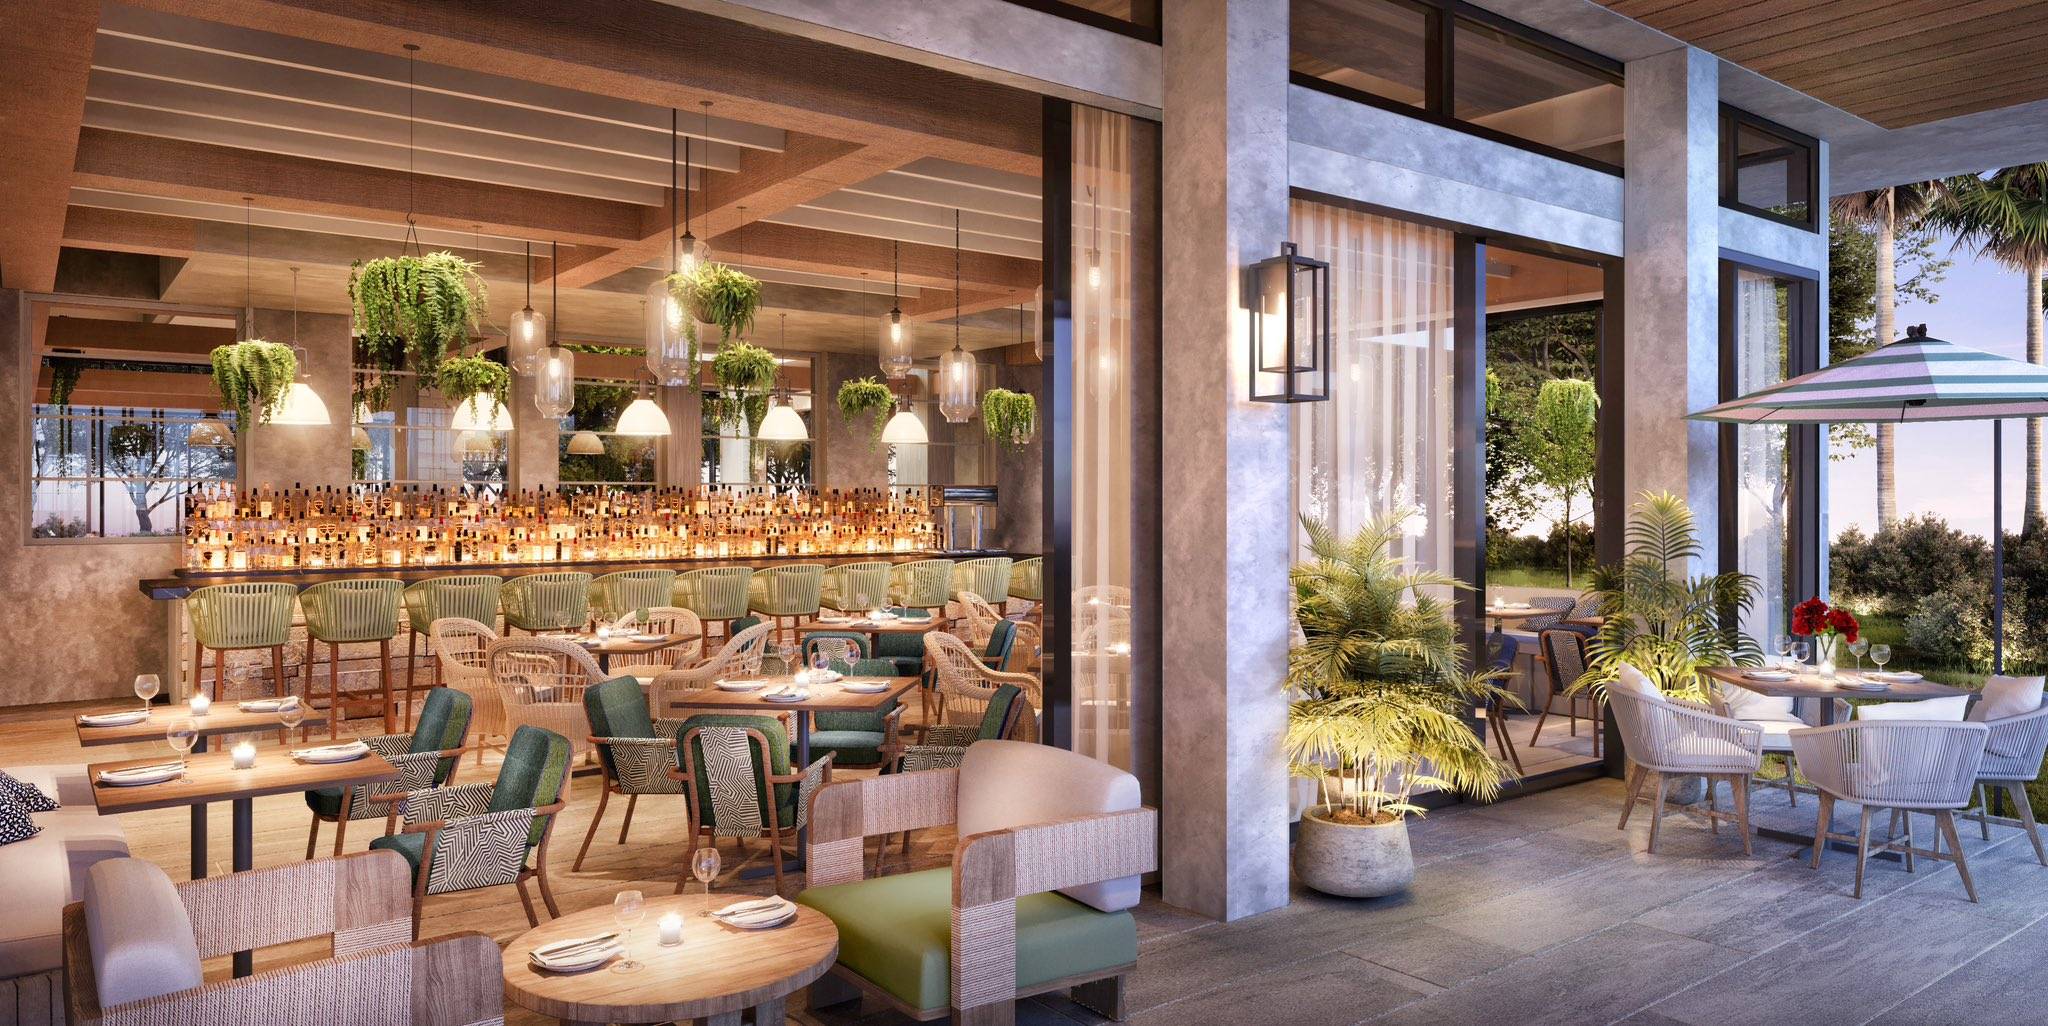 Full menus released for Summer House on the Lake opening soon at Disney Springs